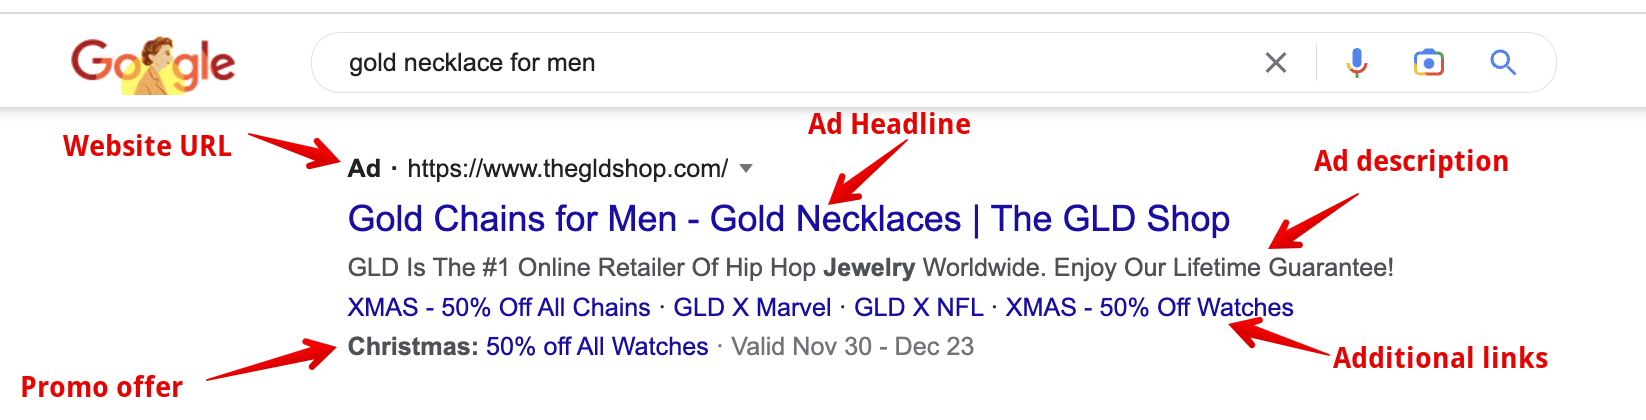 text ad example jewelry google ads